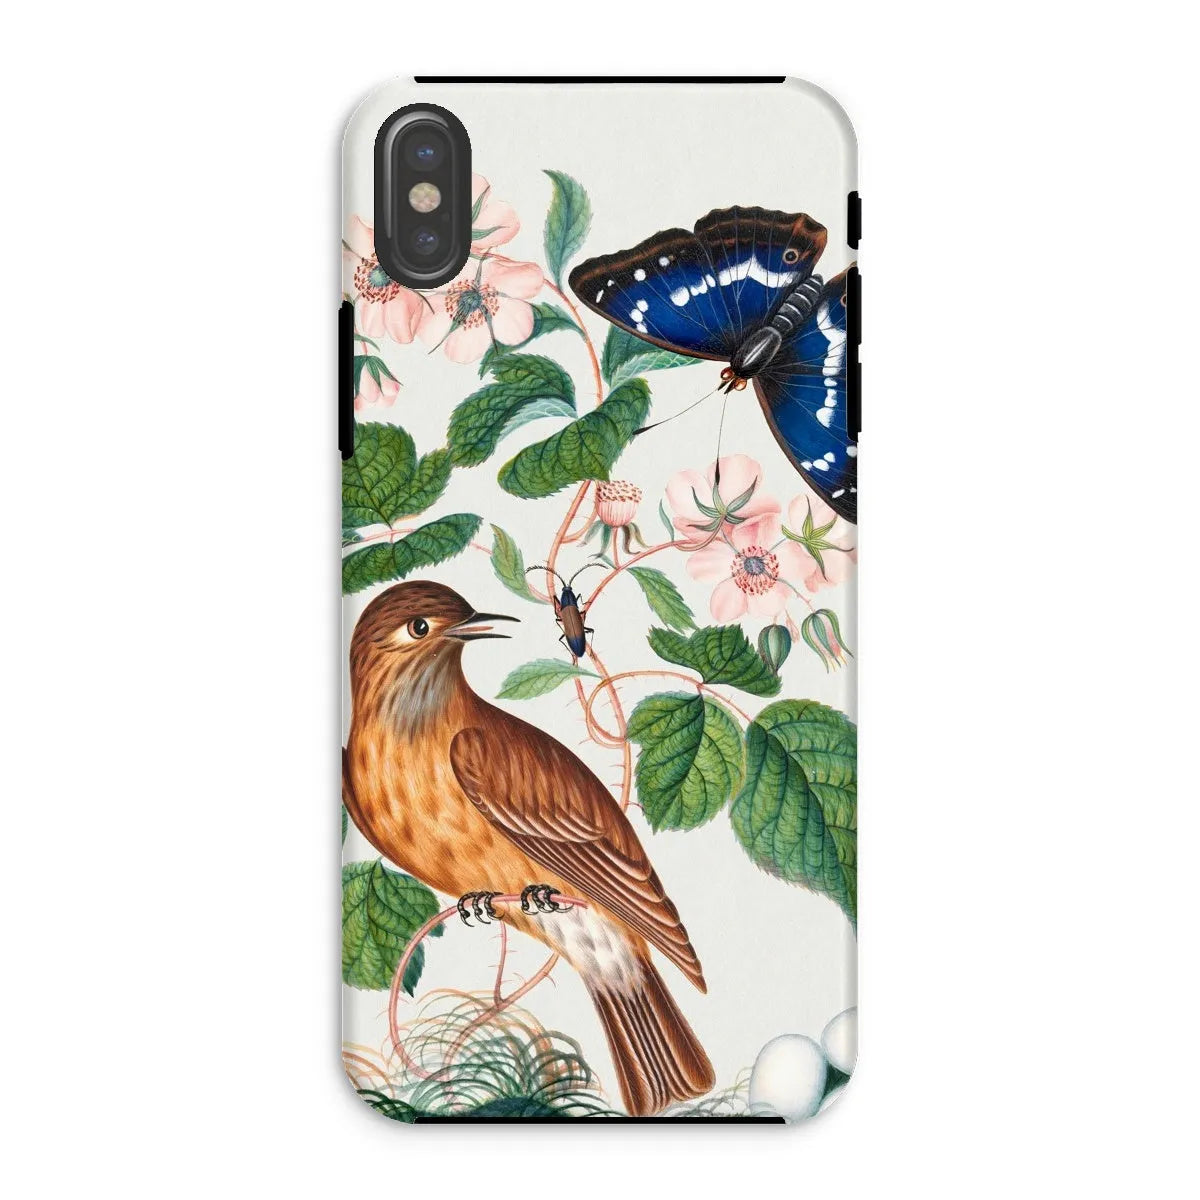 Flycatcher Emperor And Beetle - Art Phone Case - James Bolton - Iphone Xs / Matte - Mobile Phone Cases - Aesthetic Art